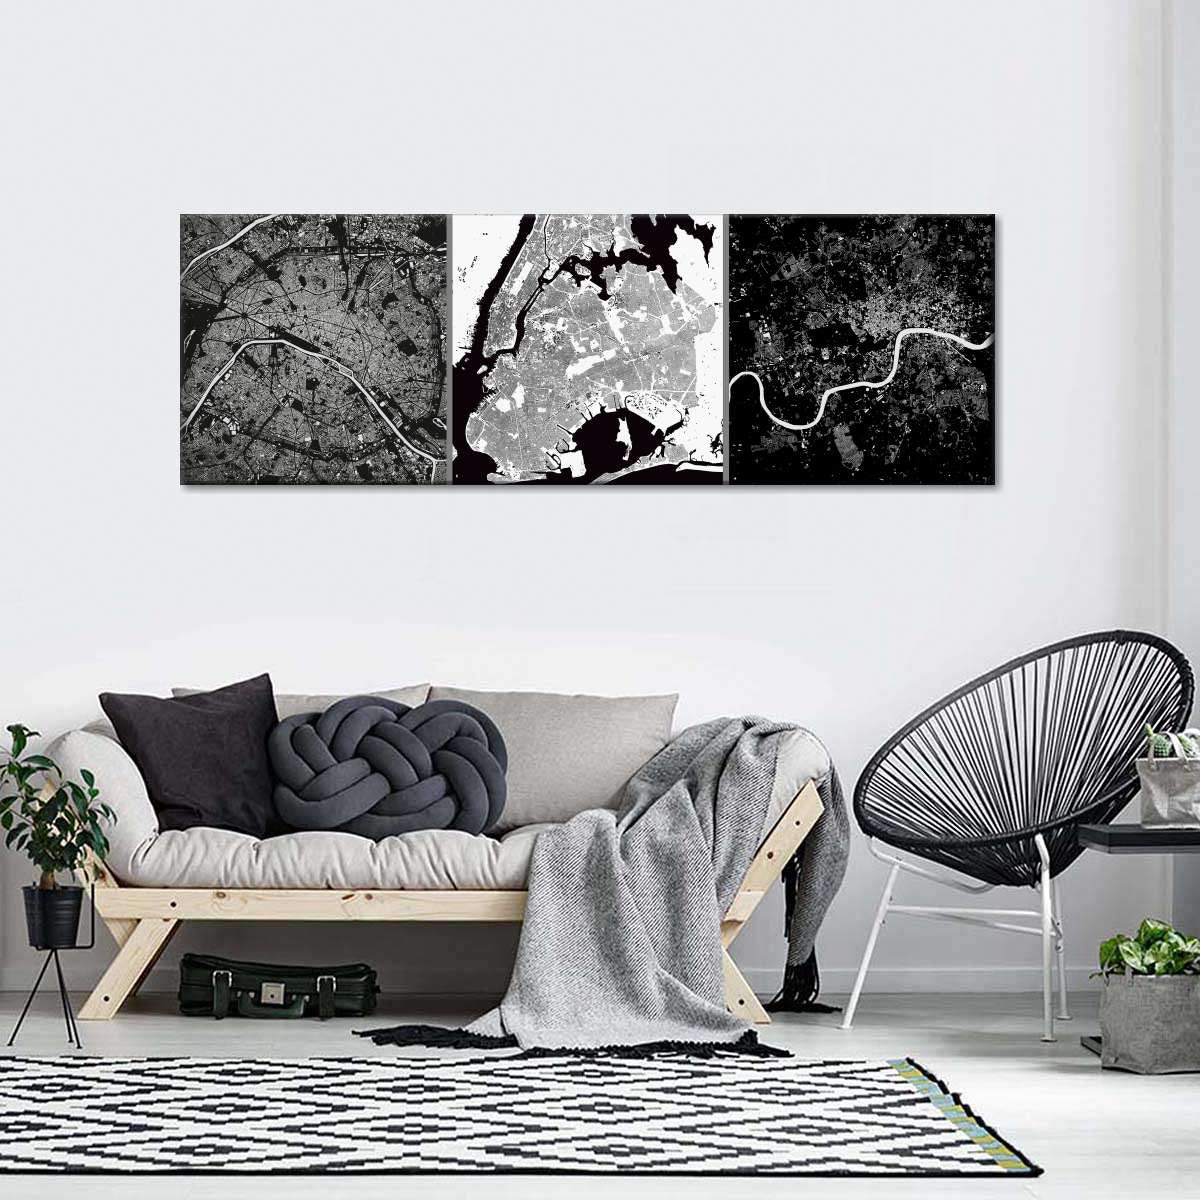 black and white abstract designs